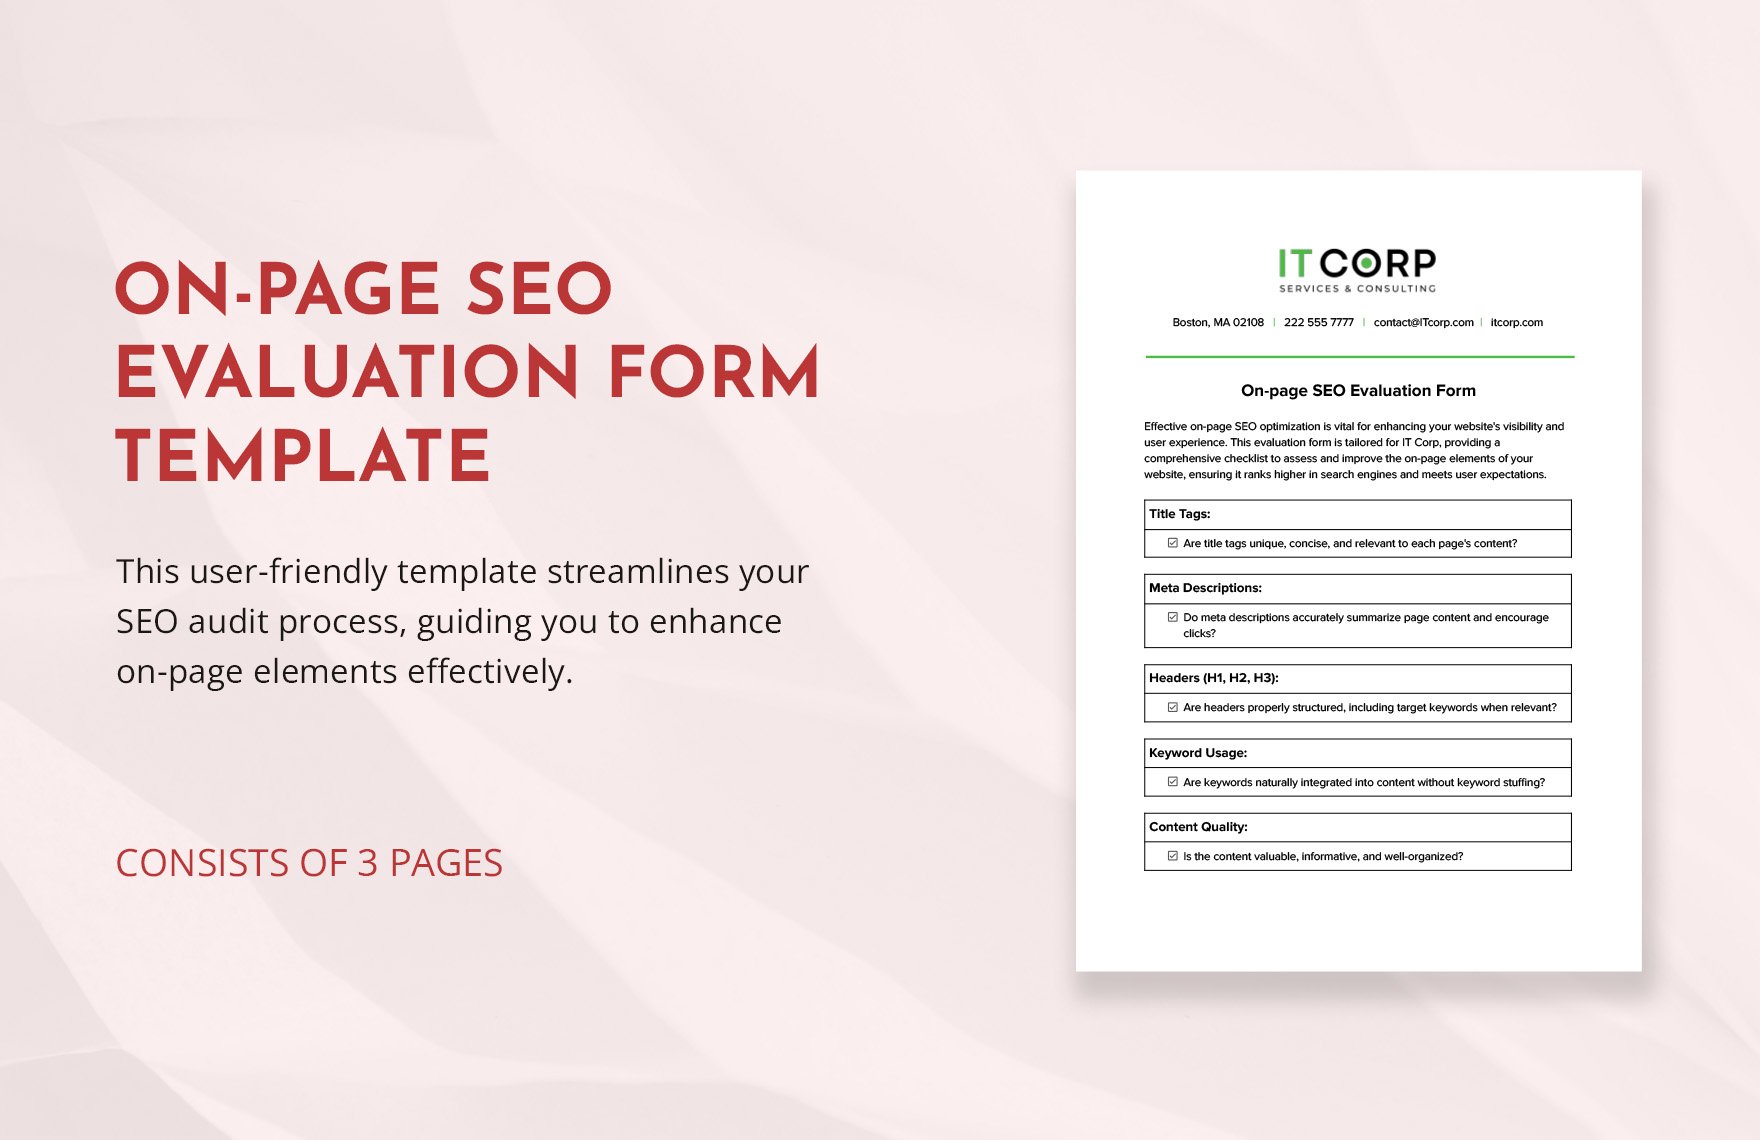 On-page SEO Evaluation Form Template